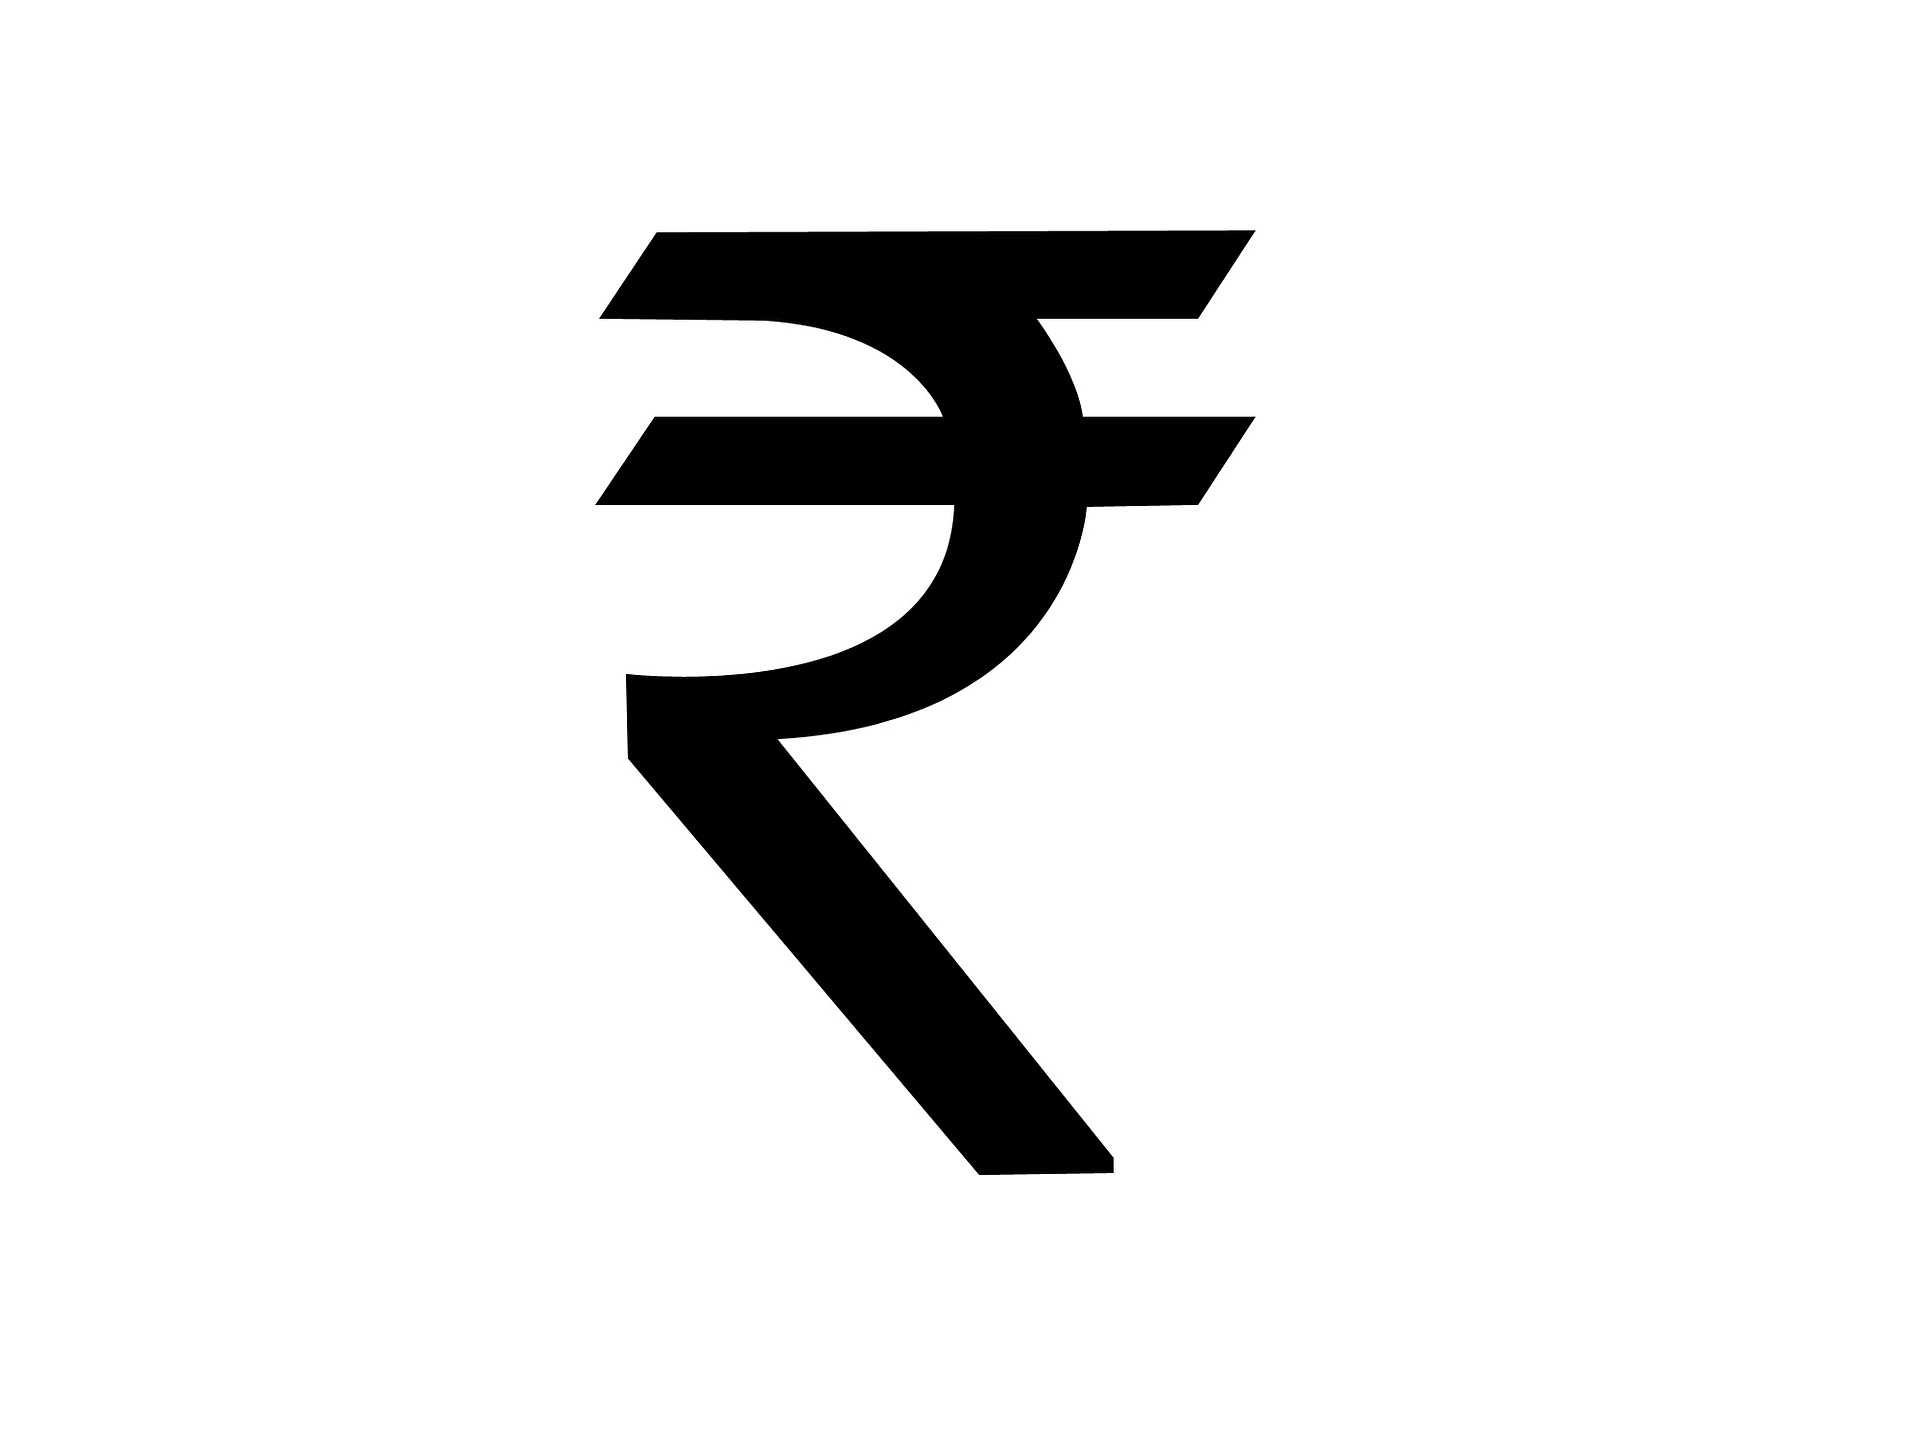 Indian Rupee Symbol ₹ Facts About The Official Currency Of India